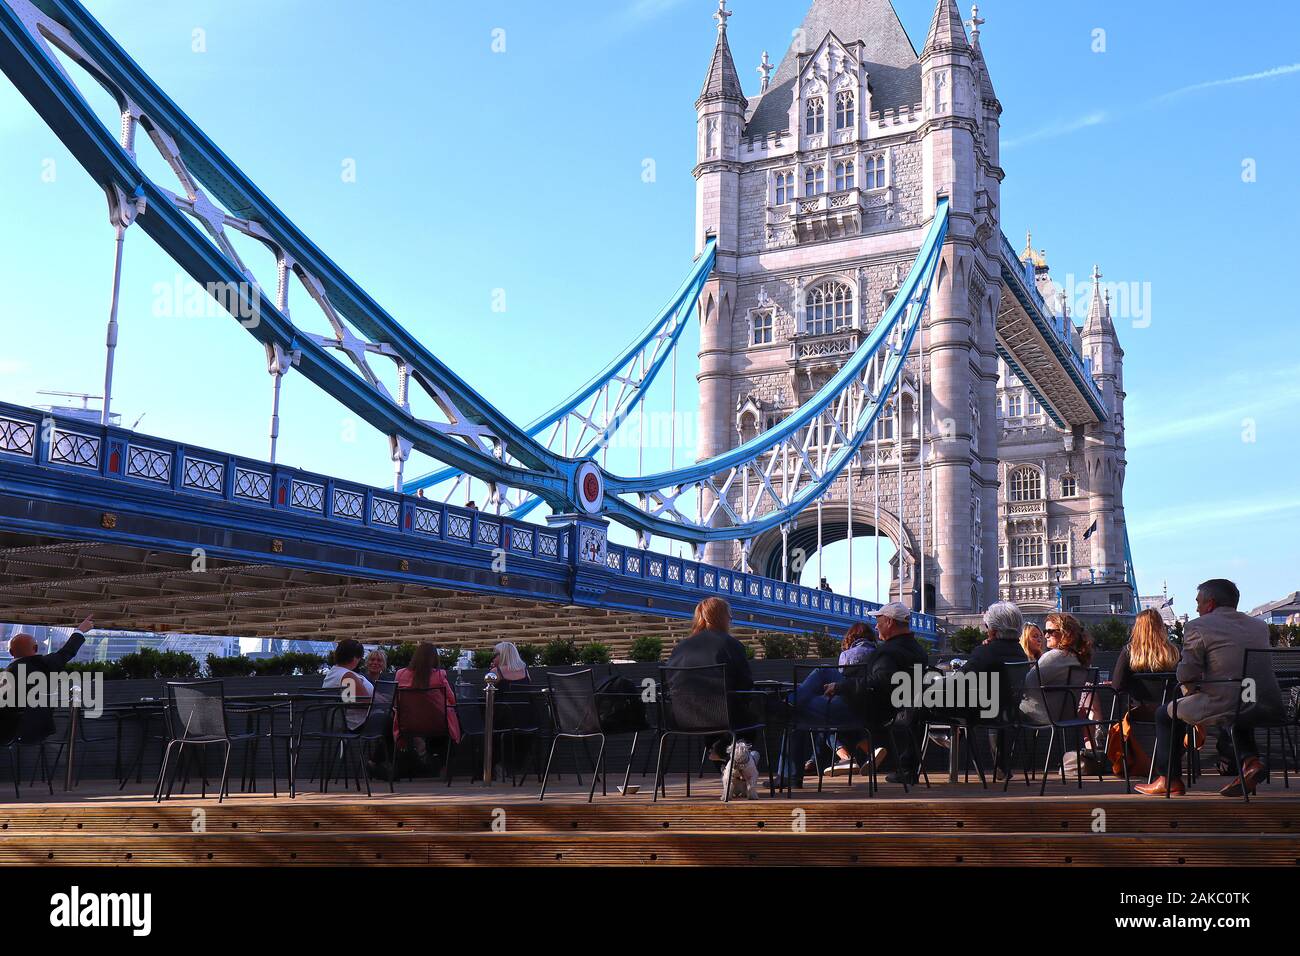 People sitting on chairs relaxing and enjoying the view of Tower Bridge in London Stock Photo